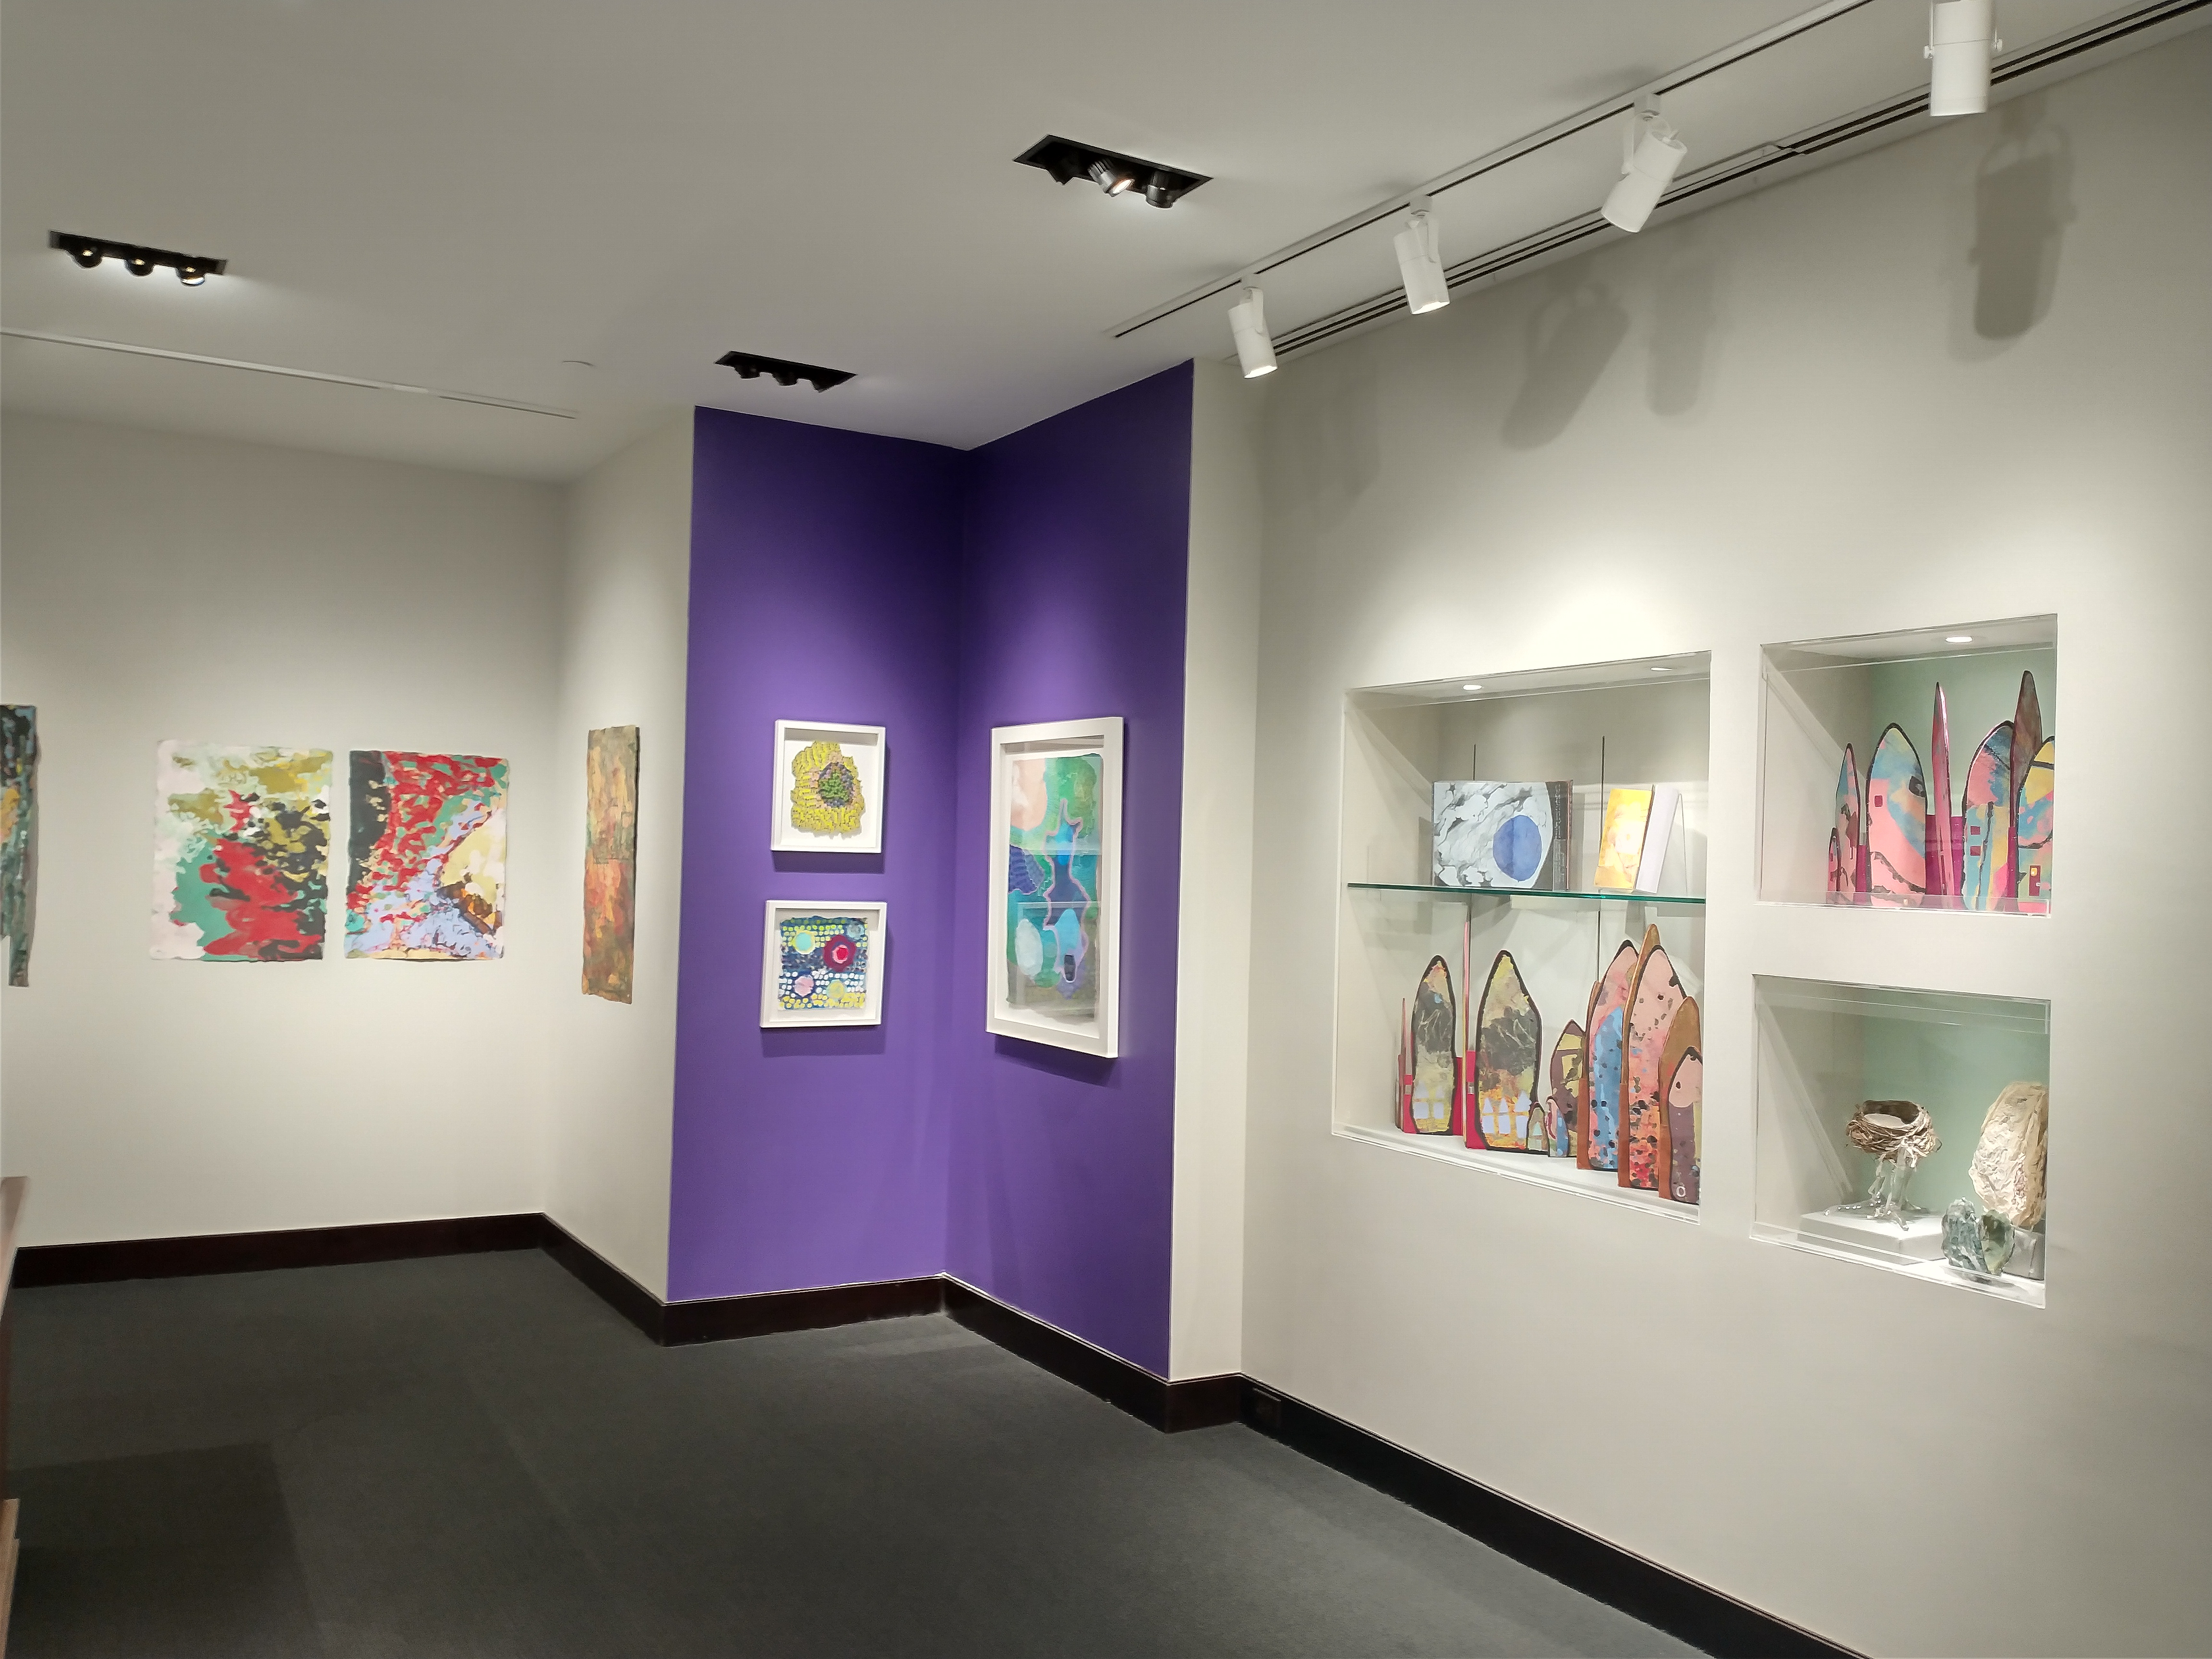 Photo looking across the large gallery to the purple accent corner and adjacent inset wall cases.